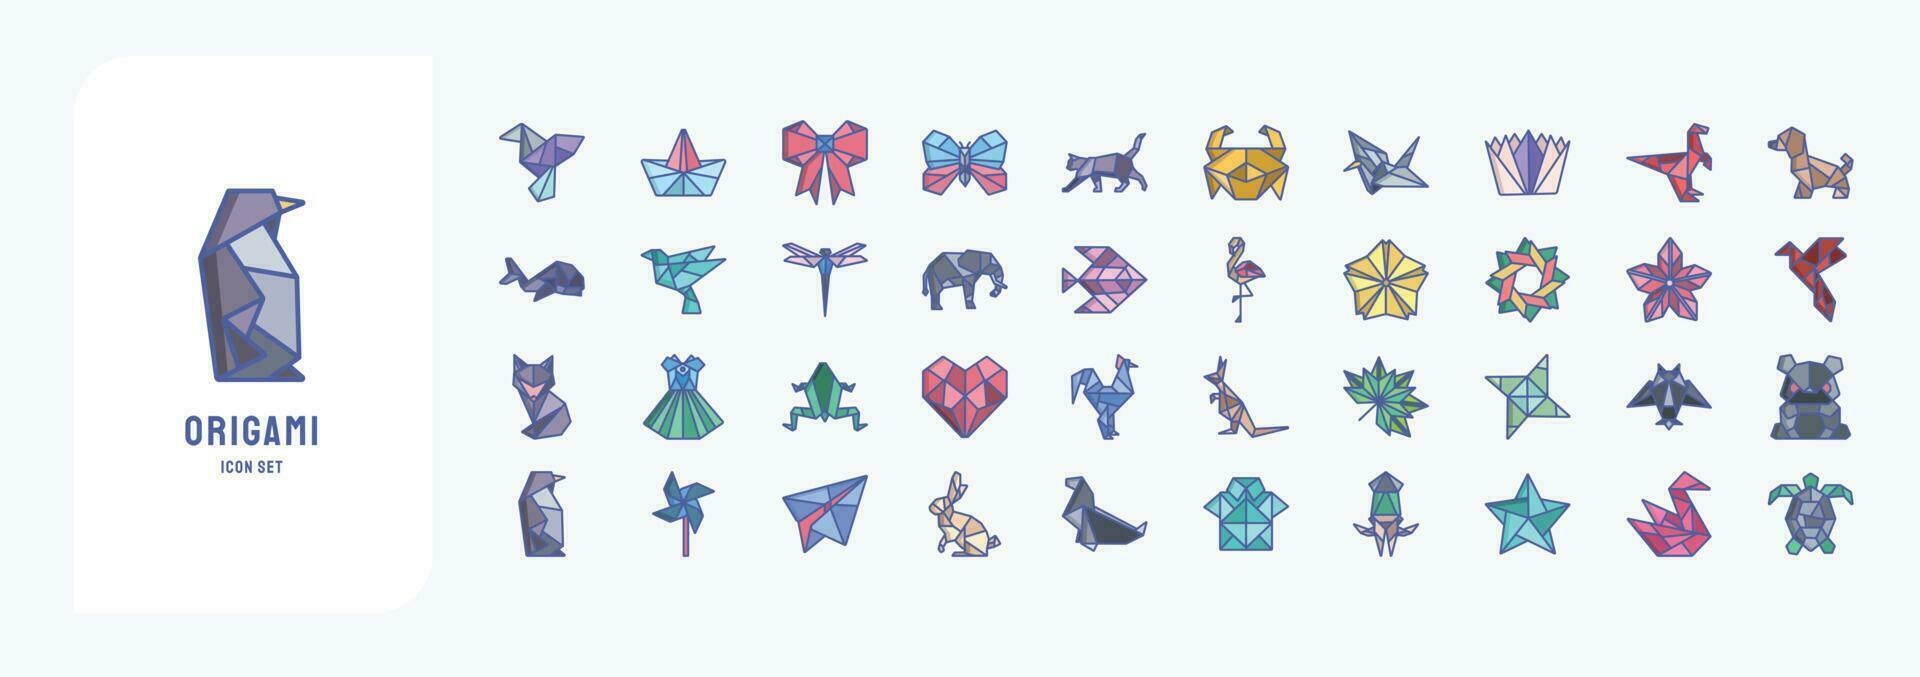 Collection of icons related to Origami, including icons like Bird, Boat, Butterfly, Cat and more vector